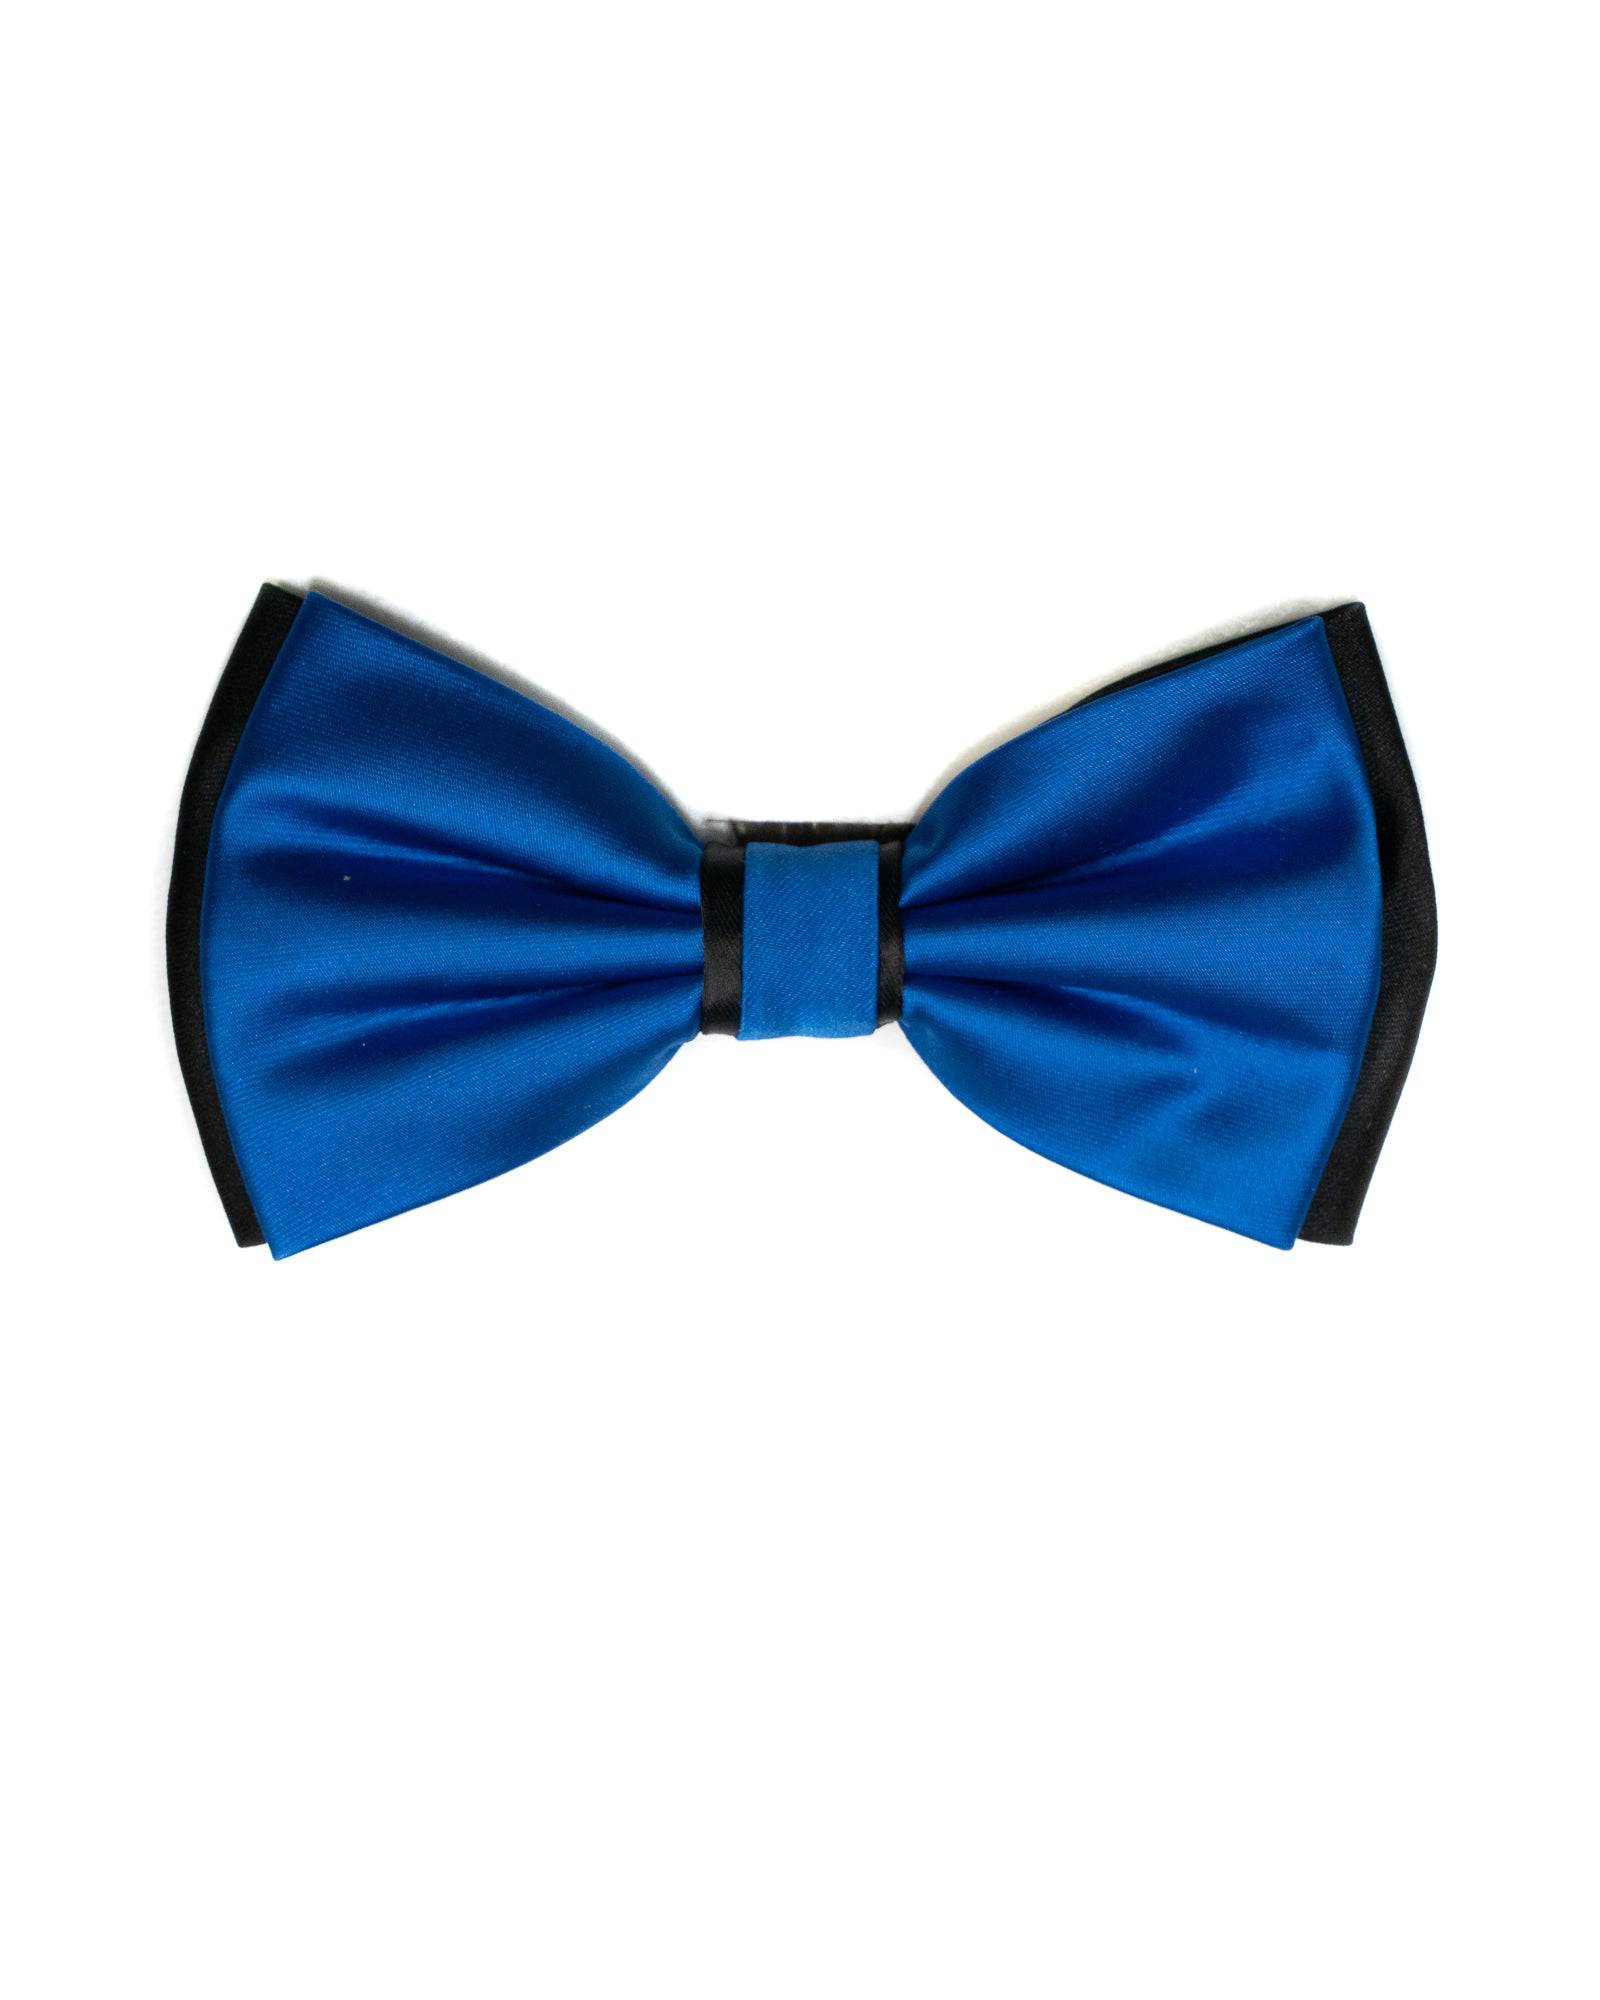 Bow Tie In Two Tone With Two Pocket Squares In Royal & Black - Rainwater's Men's Clothing and Tuxedo Rental